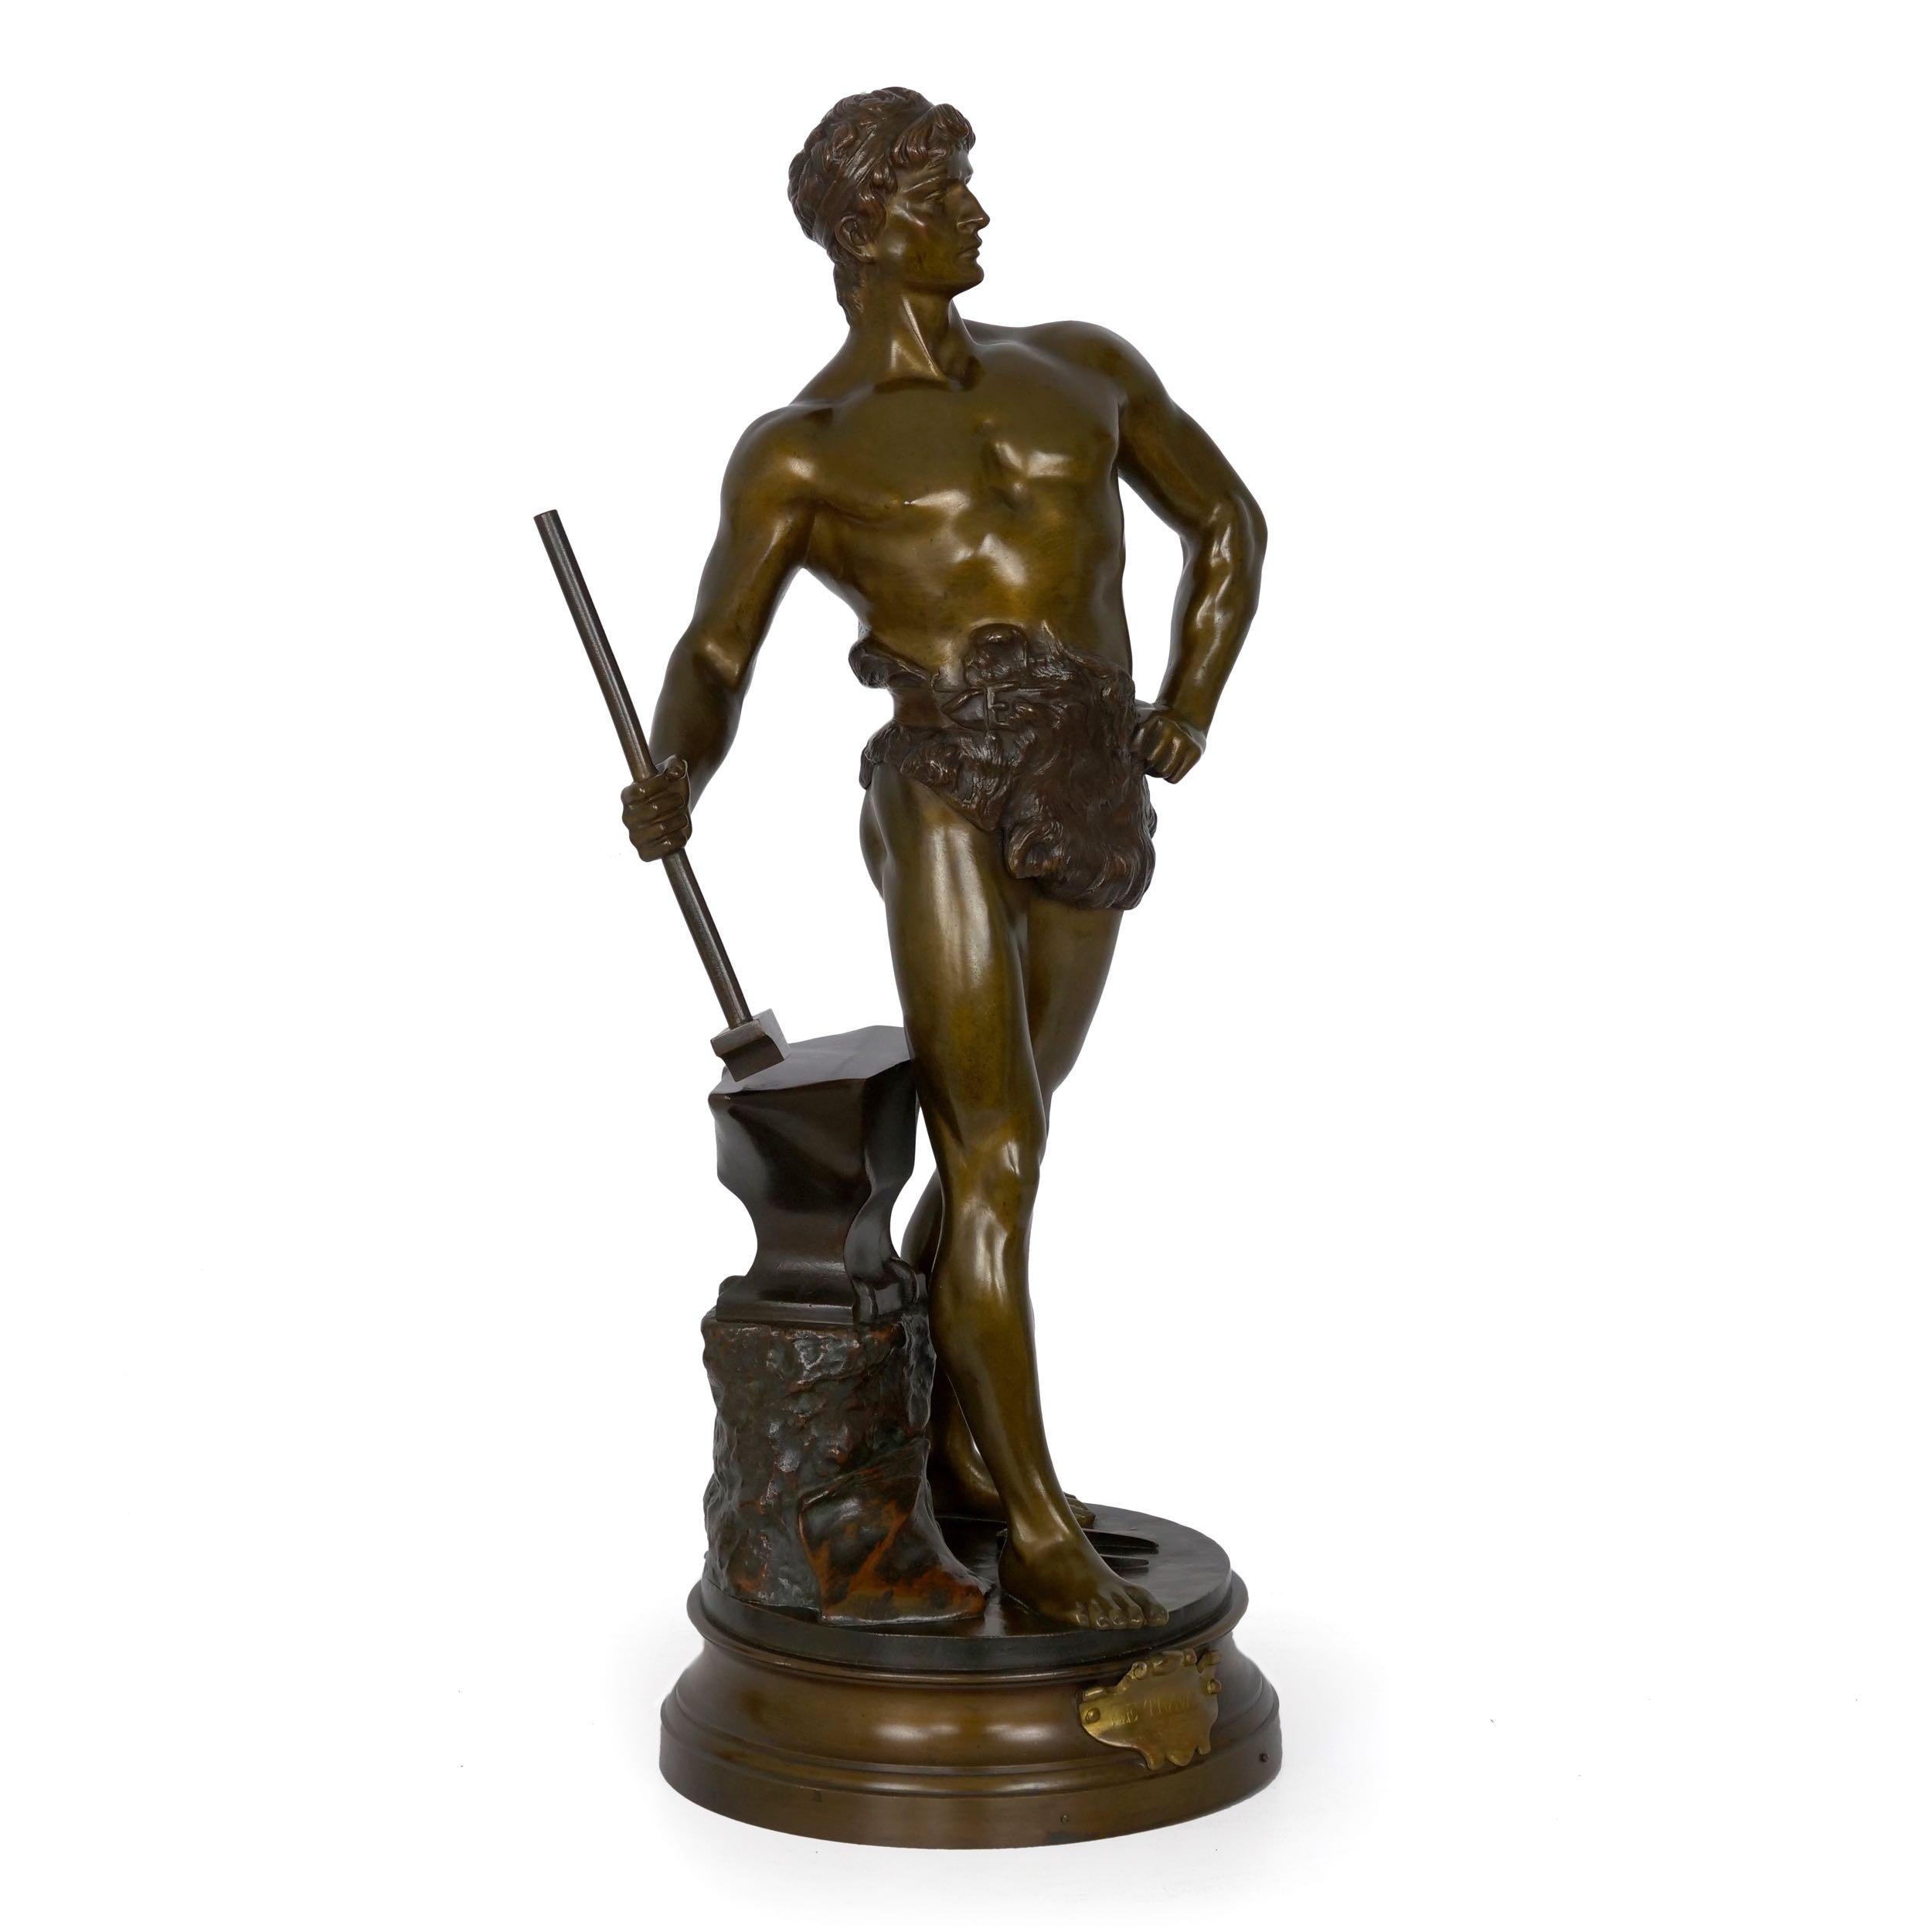 With an exquisite polychromed patina, there is a complexity to this figure of “Le Trevail“ that is most striking. Utilizing a range of chemicals to bring varying hues of bronze, brown, gold and black to the surface, these were then carefully